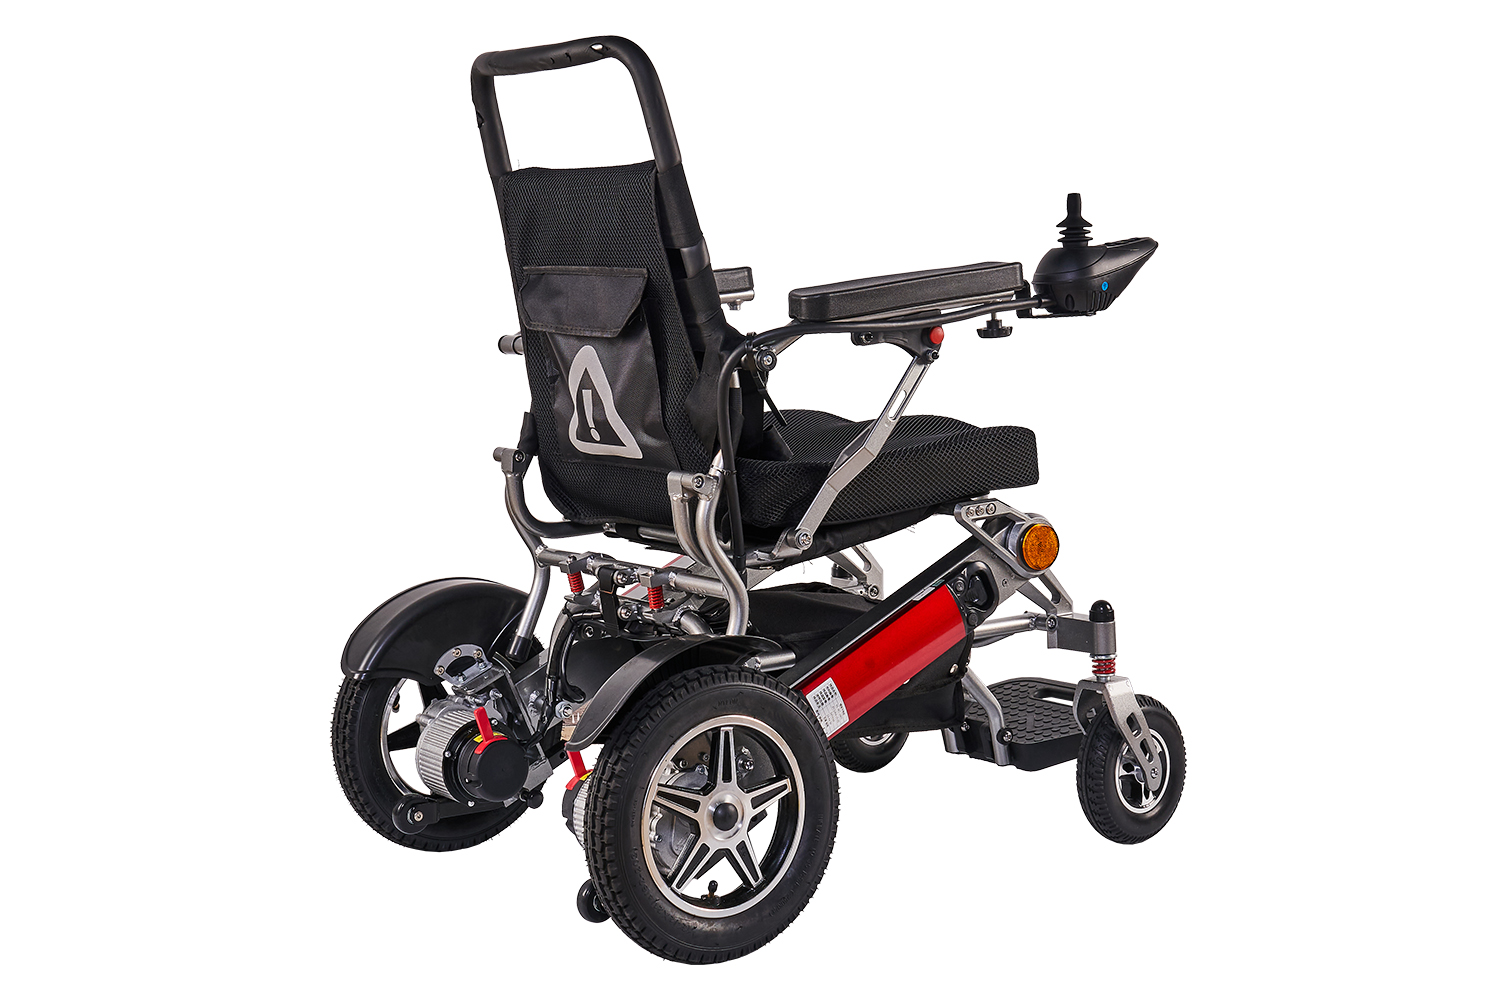 Electric wheelchair usage and future trends: Unleashing mobility through power and portability